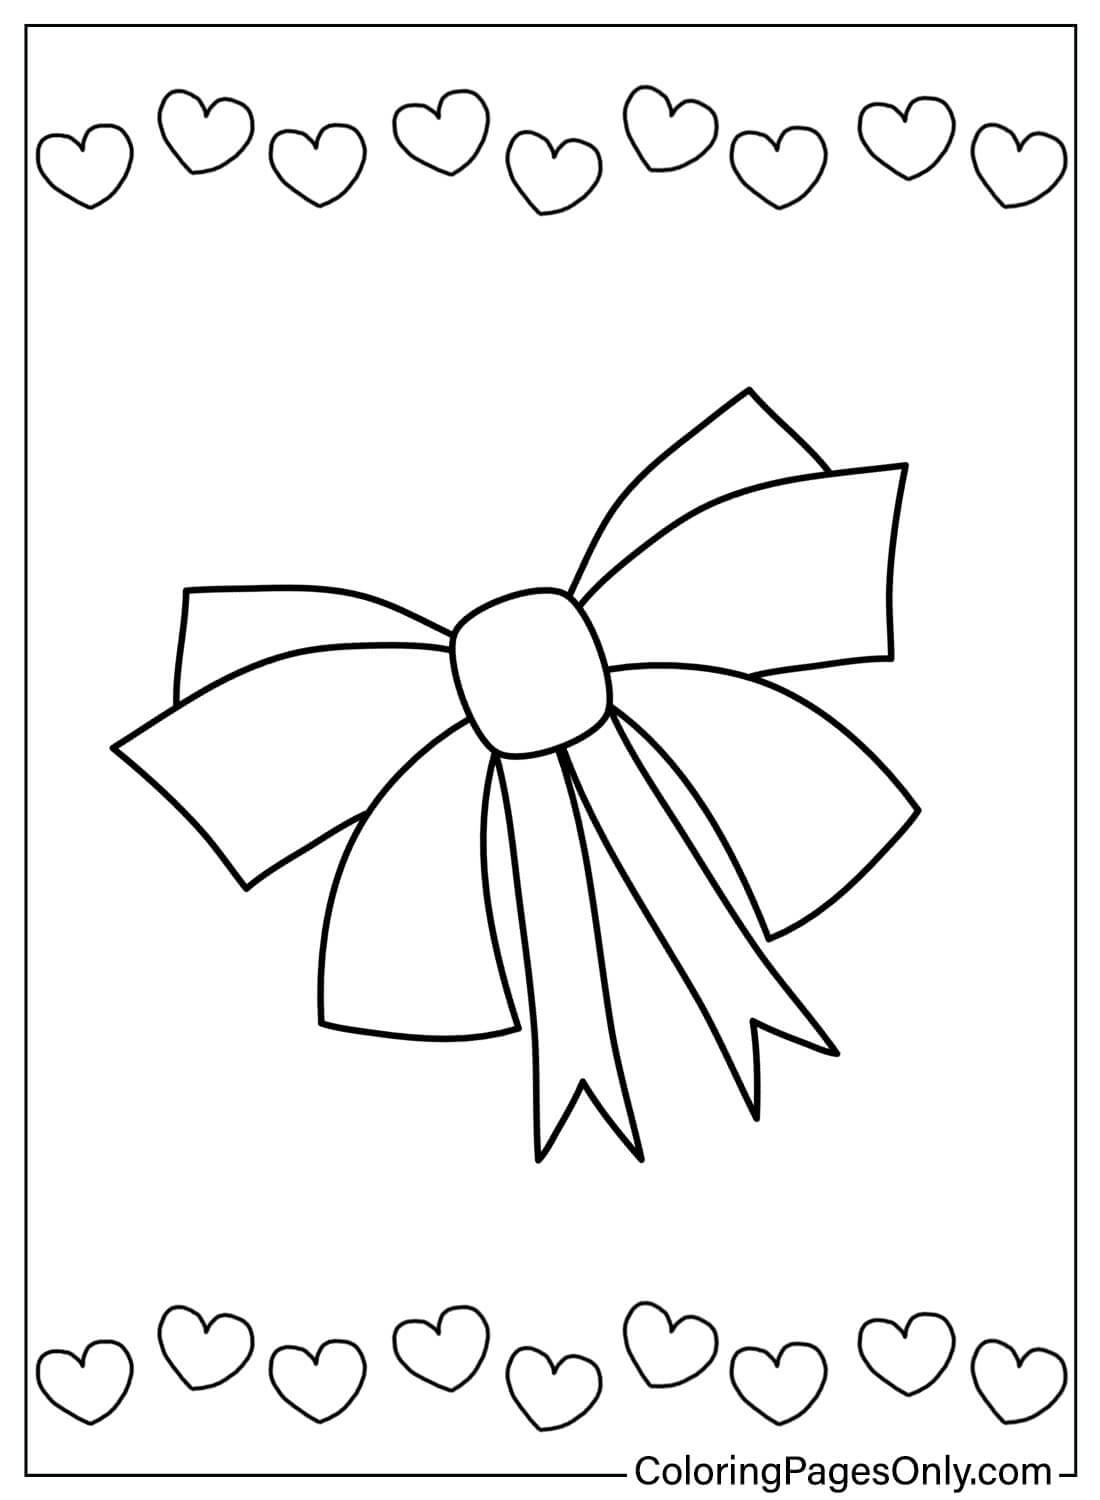 Coloring Pages Bow from Bow